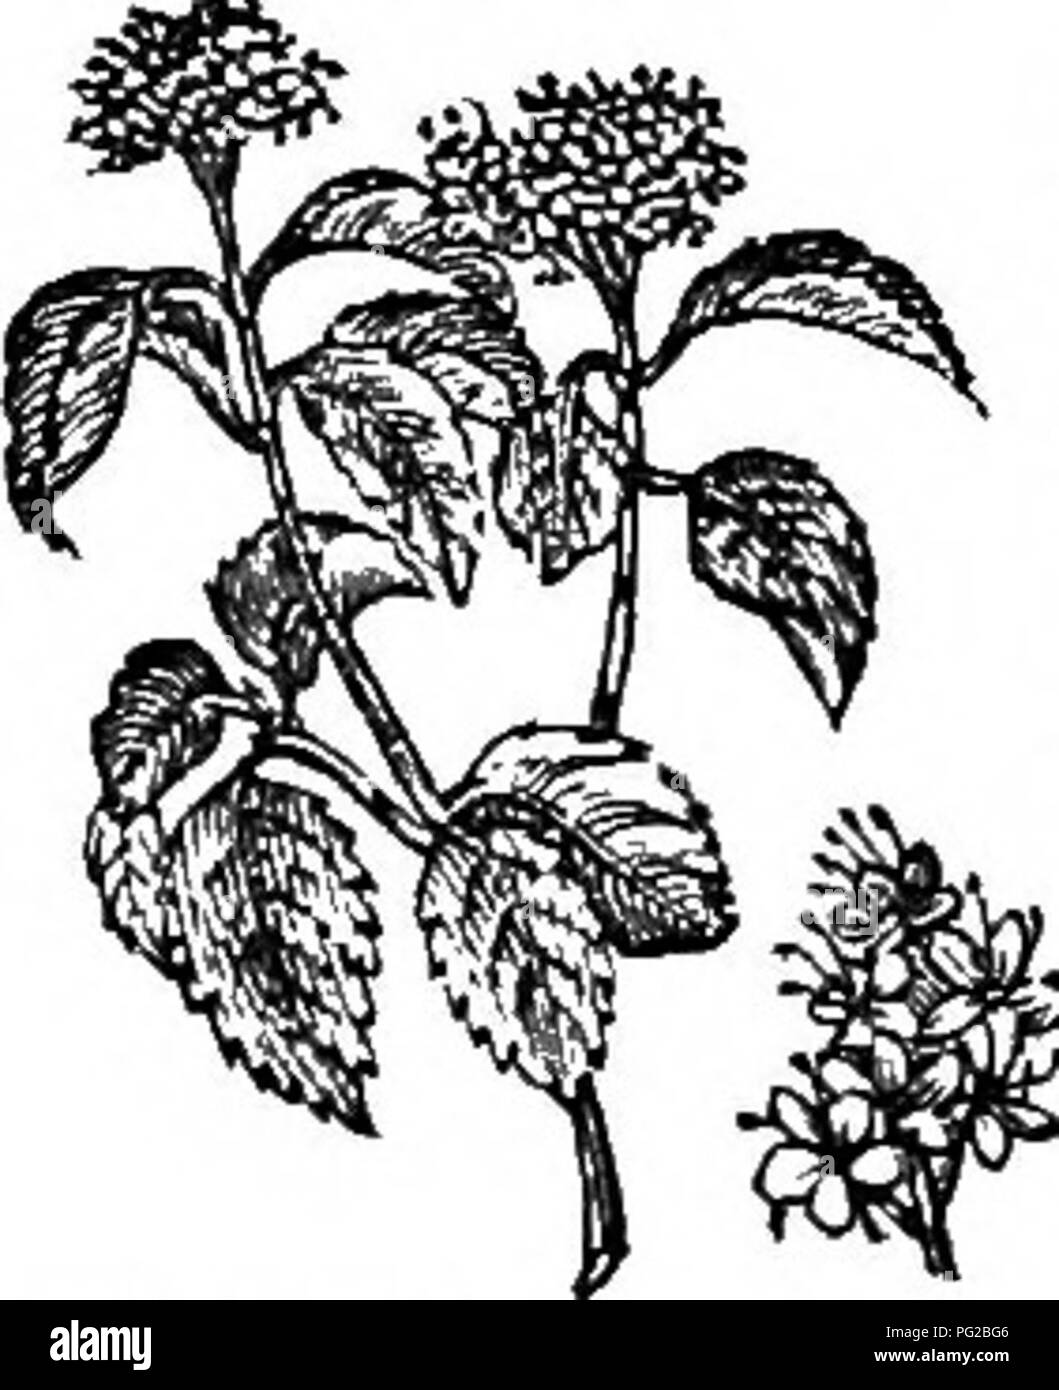 . Trees and shrubs : an abridgment of the Arboretum et fruticetum britannicum : containing the hardy trees and schrubs of Britain, native and foreign, scientifically and popularly described : with their propagation, culture and uses and engravings of nearly all the species. Trees; Shrubs; Forests and forestry. XL. CAPRIFOLIA CE^ : riBU RNUM. 519 Resembles the preceding species, but is not so straggling in its growth. as i 5. V. (L.) nu'dum L. The t)sked-cori/mbed Viburnum. Identification. Lin. Sp., 383.; Dec. Prod., 4. p. 325. ; Don's Mill., 3. p. 440. Svnonyme. V. pyrif&amp;llum Pair. ETigrav Stock Photo